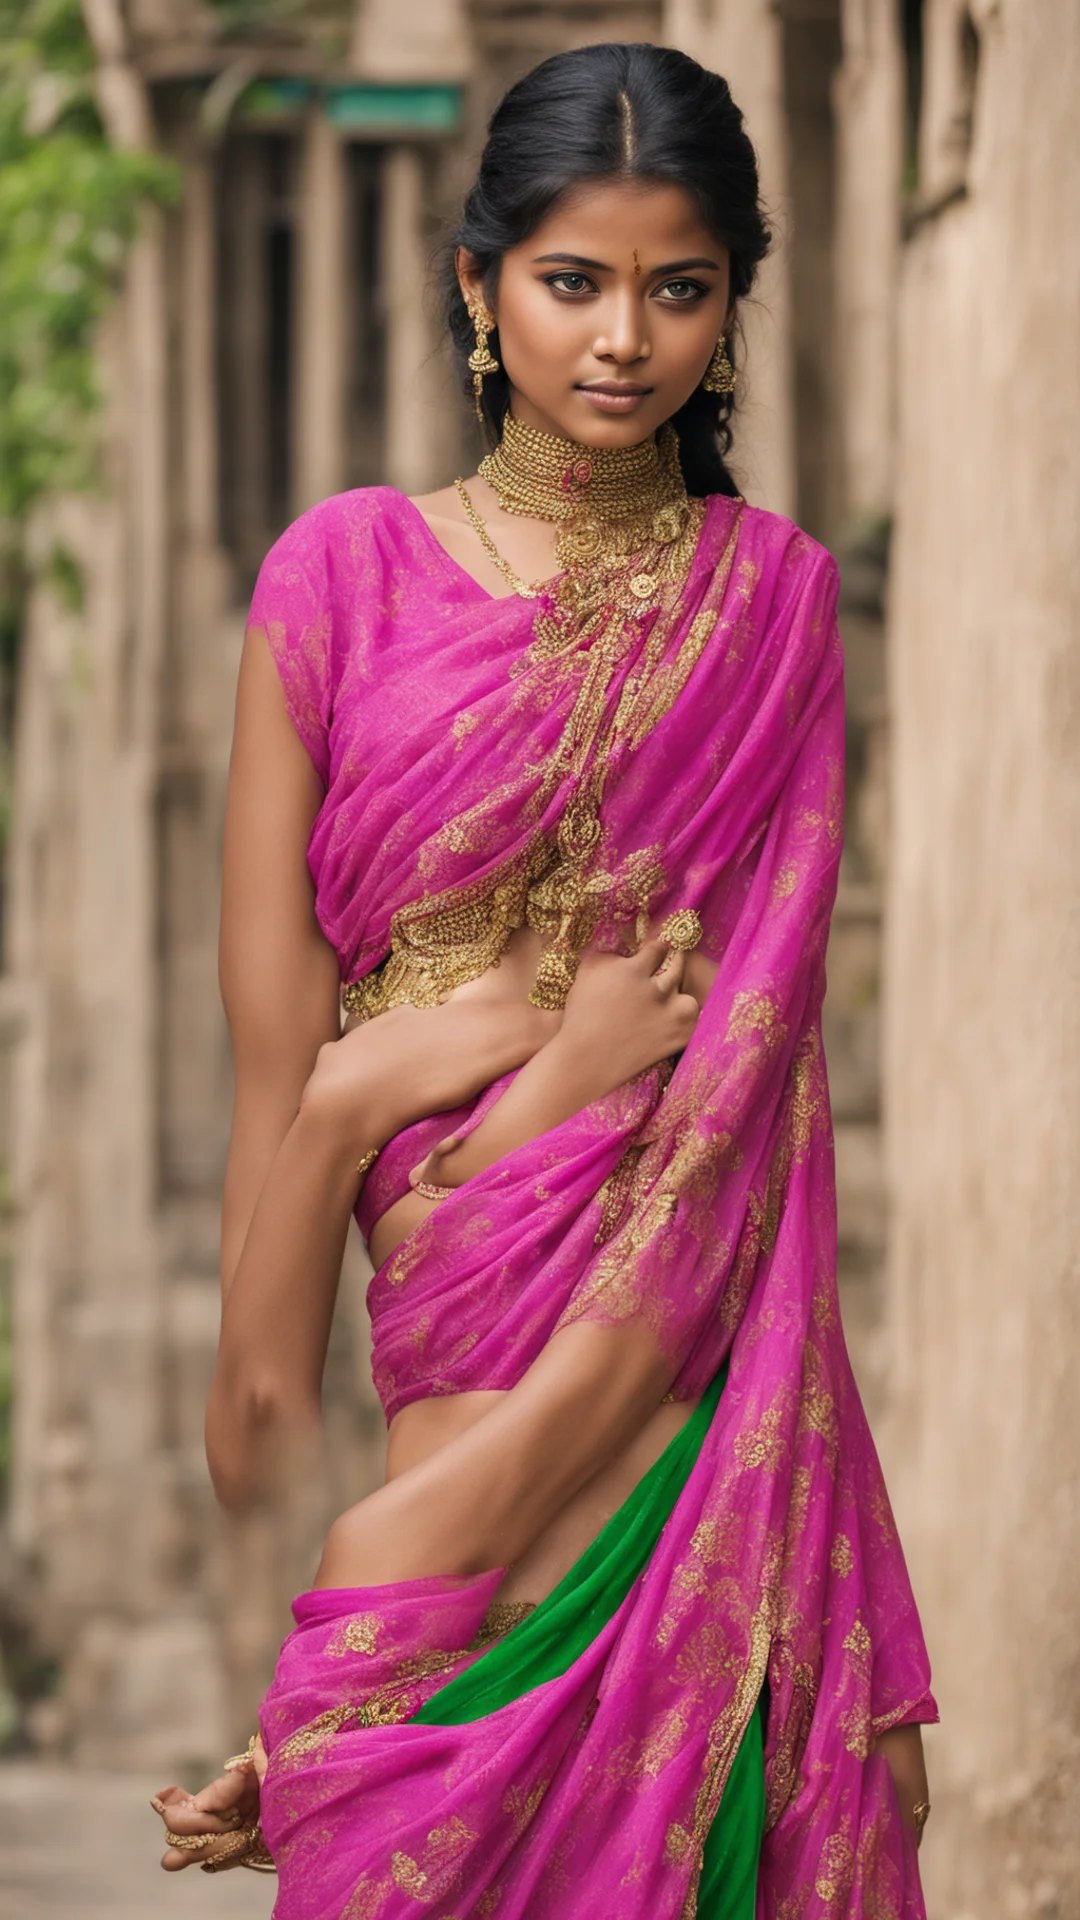 aiindian girl in saree amazing awesome portrait 2 tall